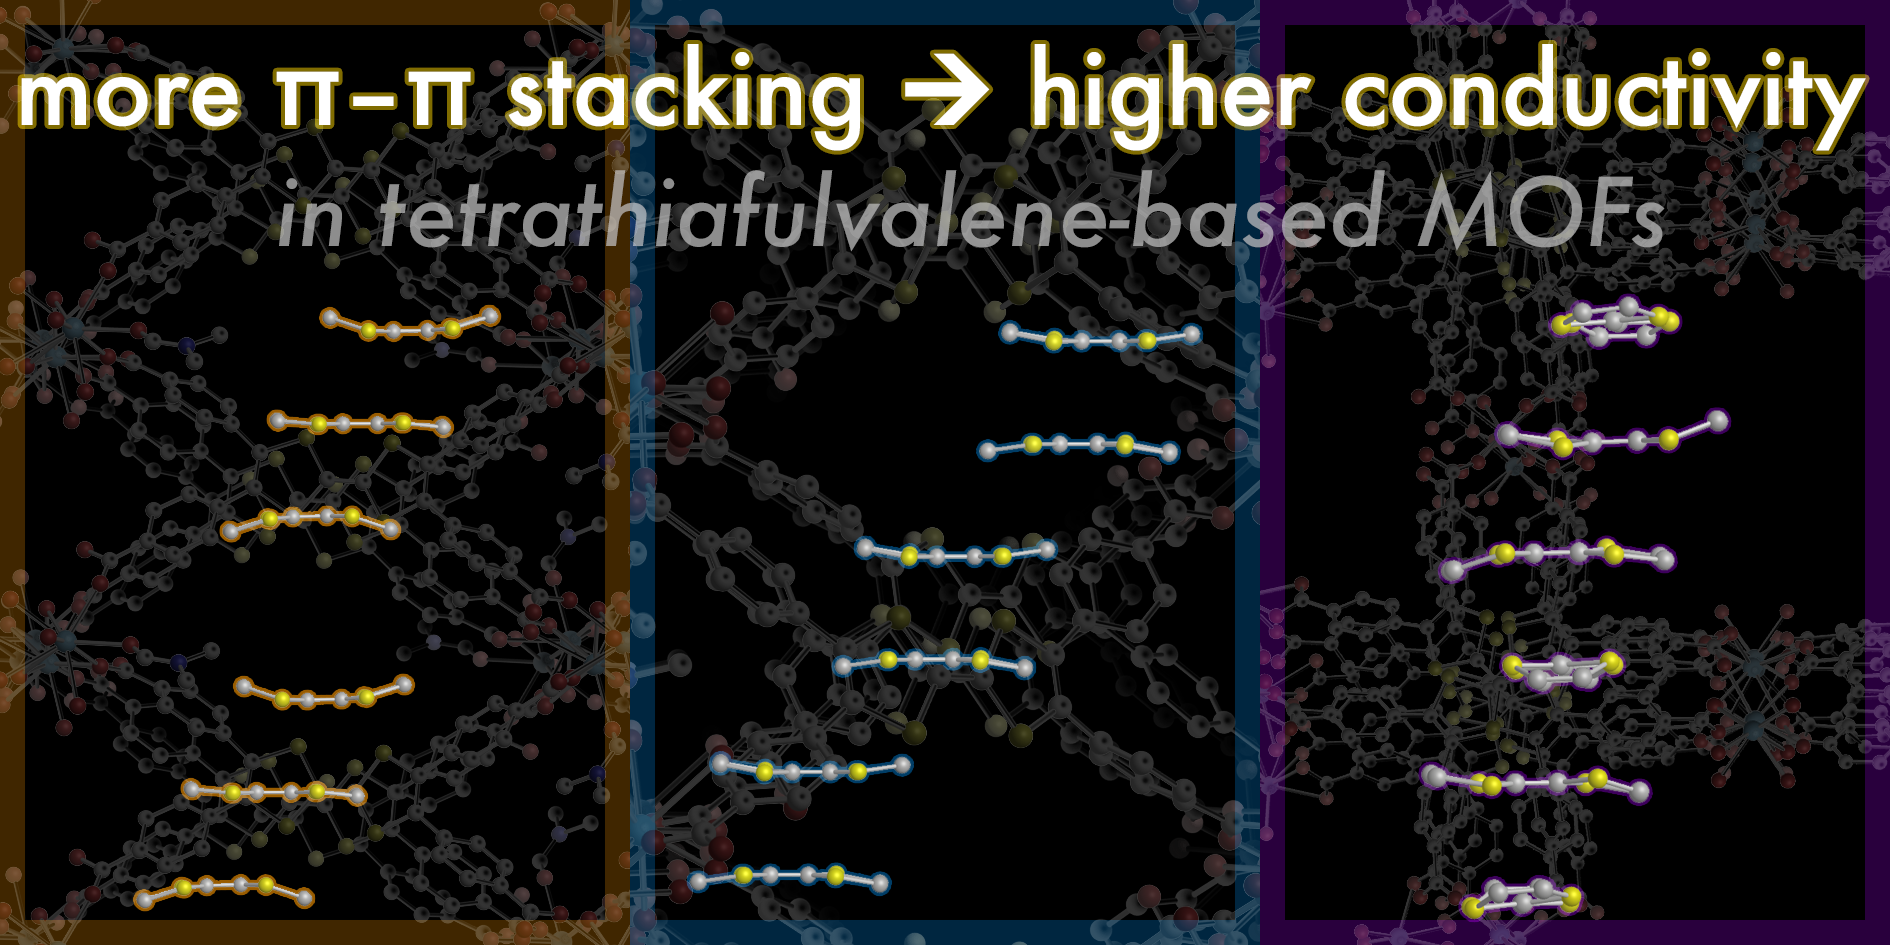 Pi stacking in MOFs